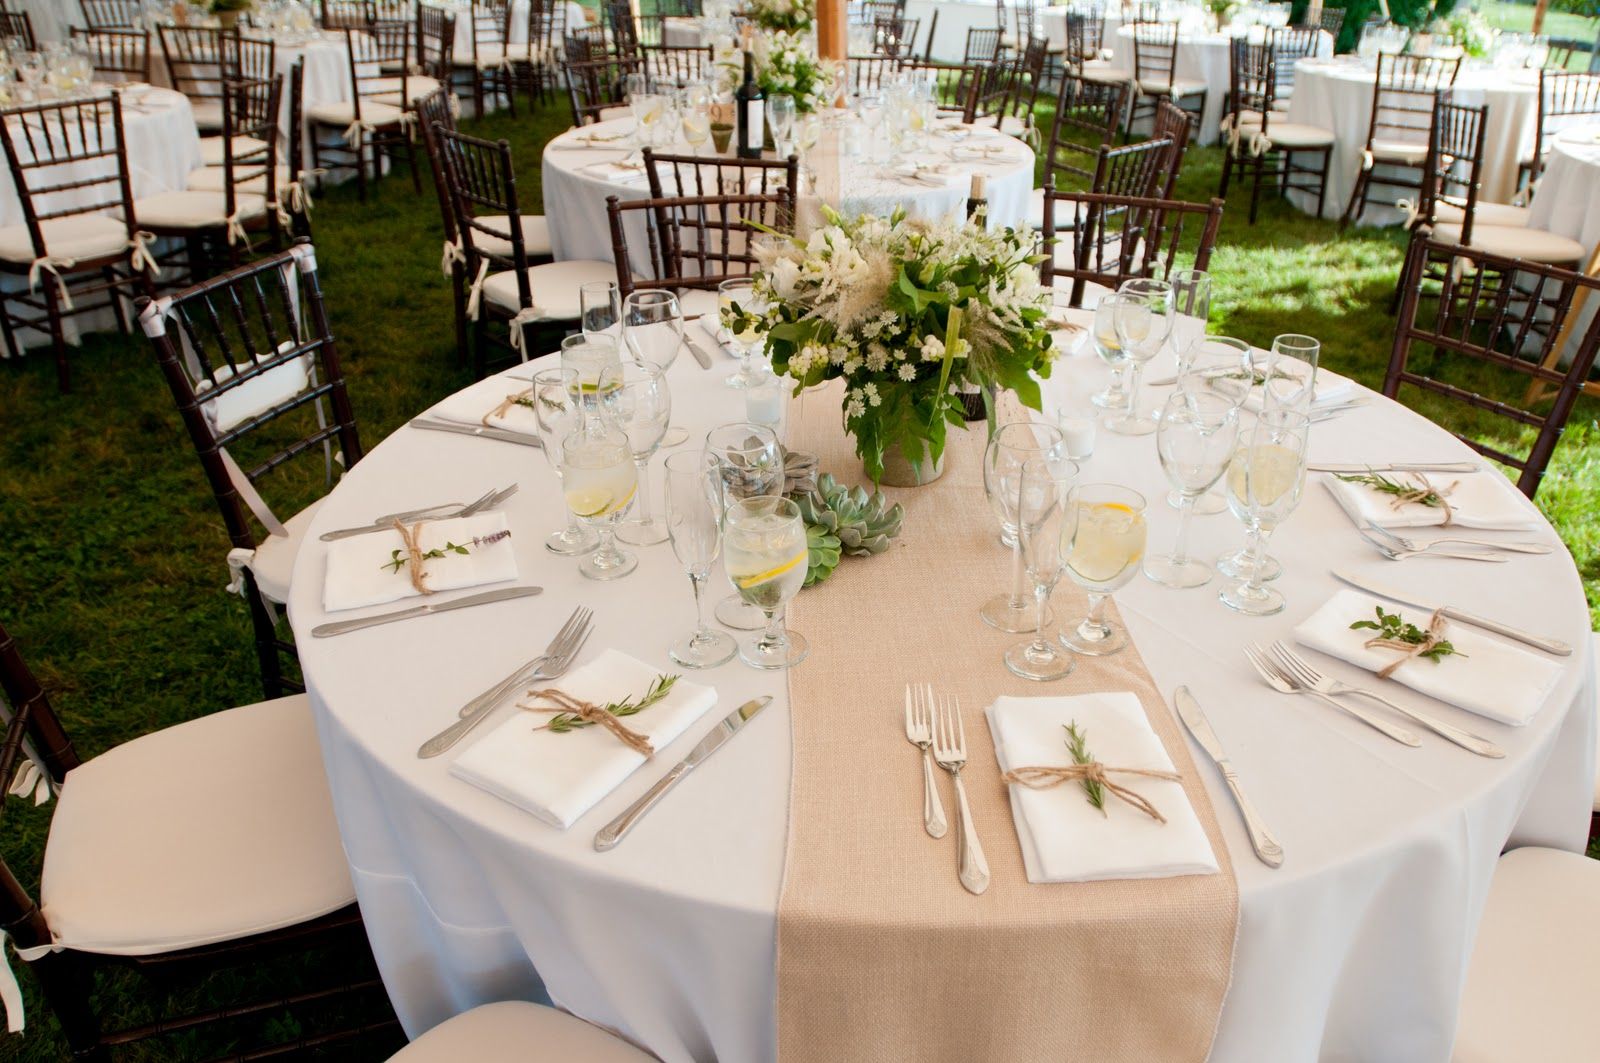 How To Make Table Runners For Wedding Reception